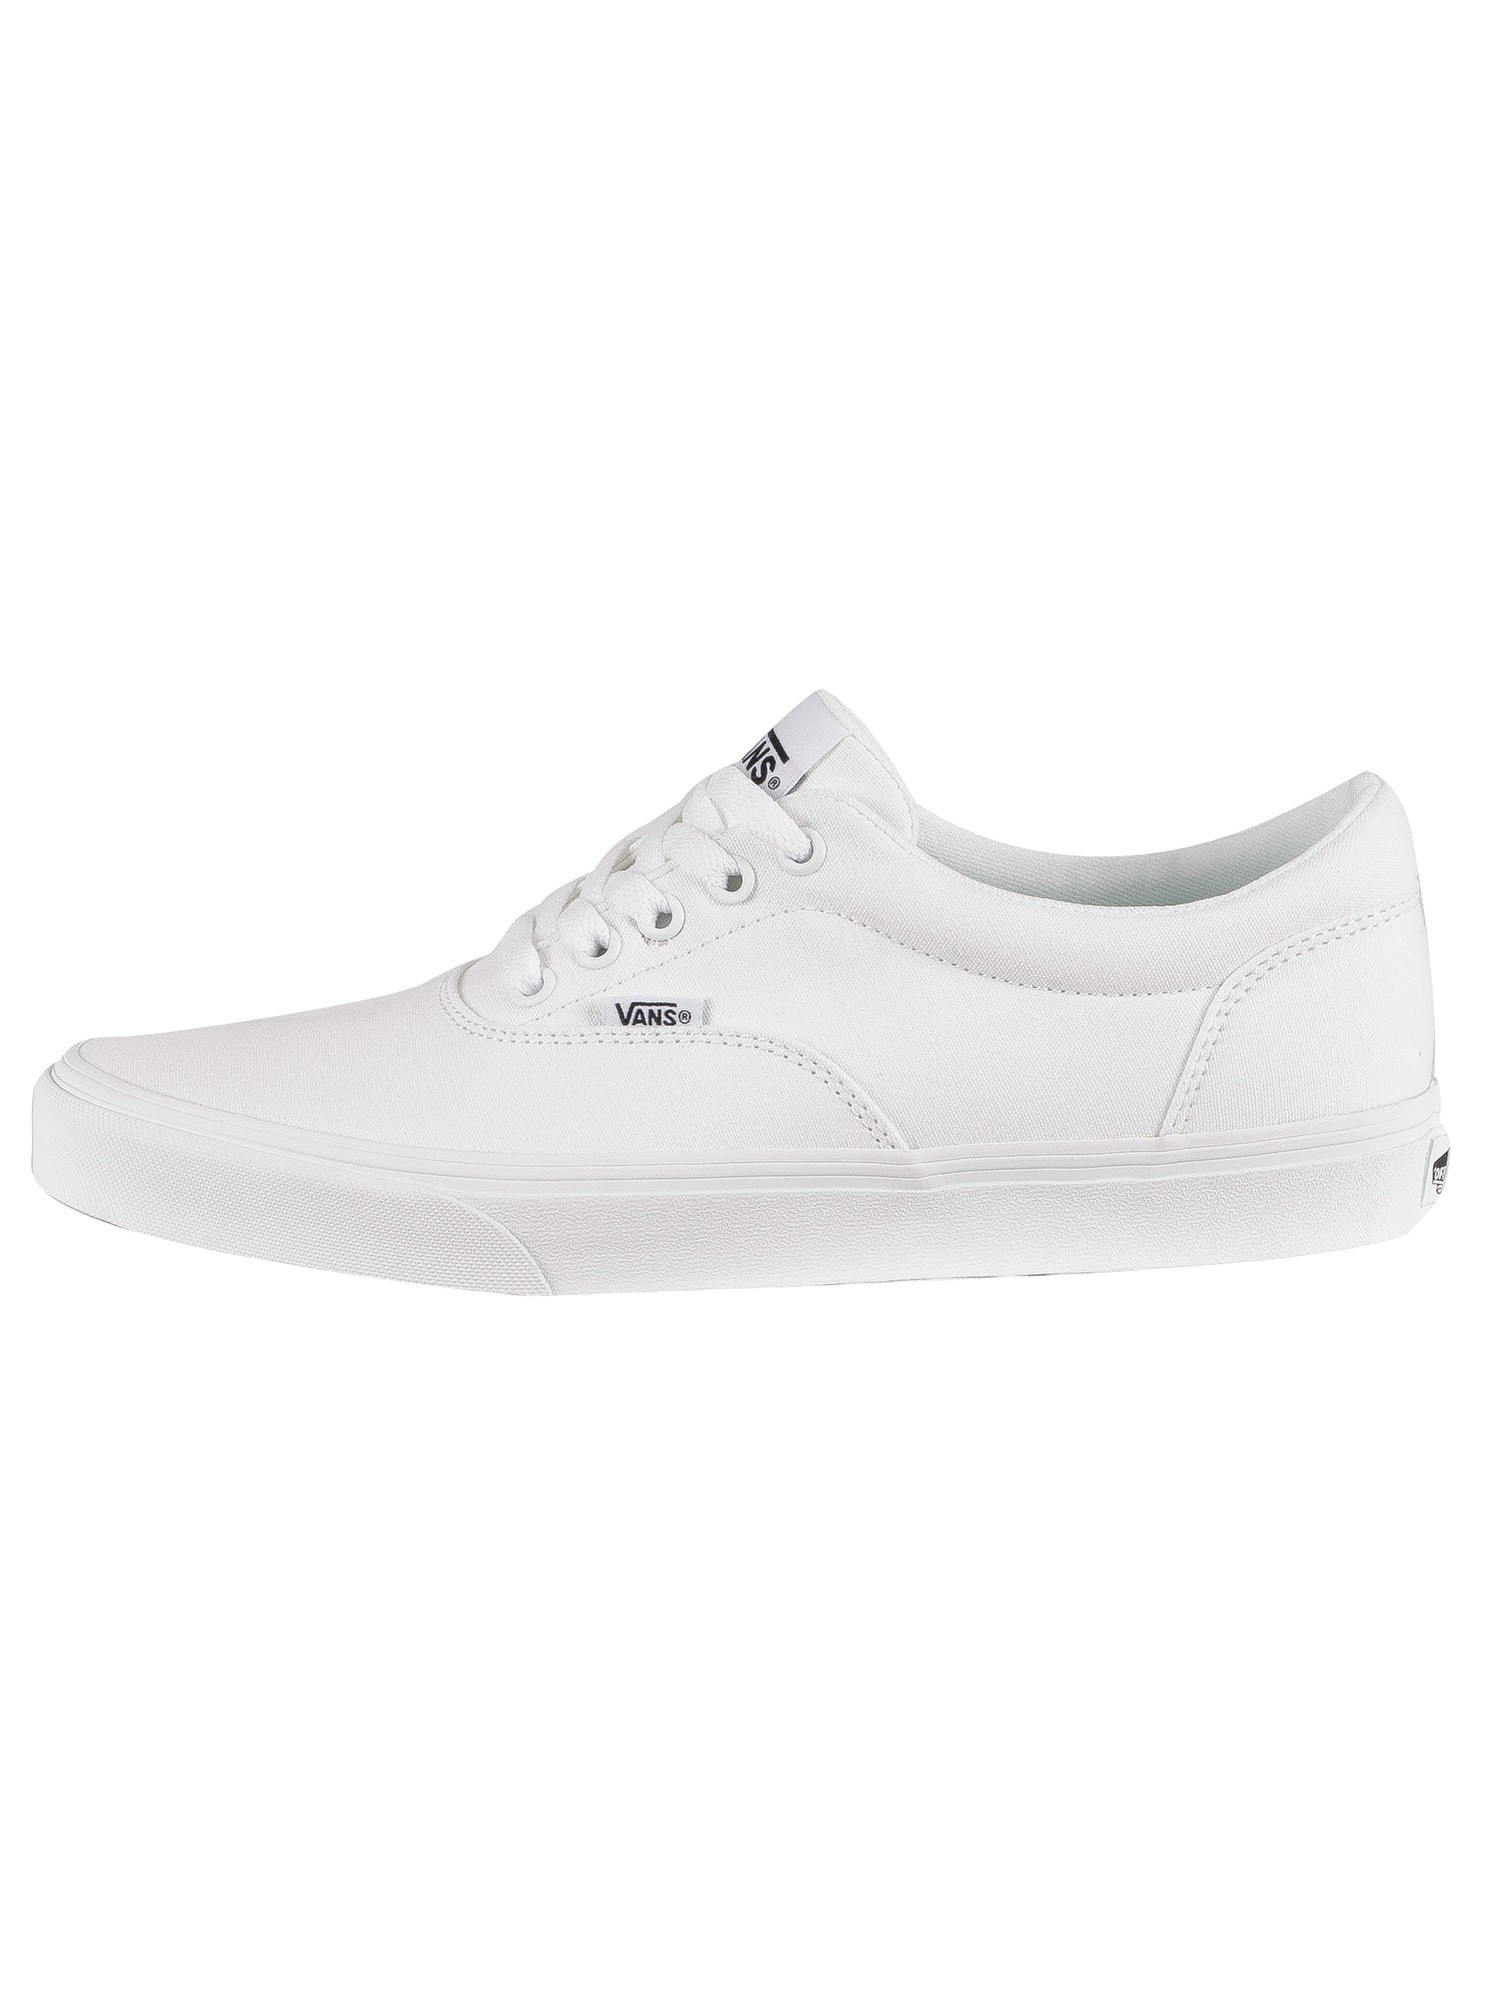 Vans Doheny Triple White Canvas Trainers | Standout